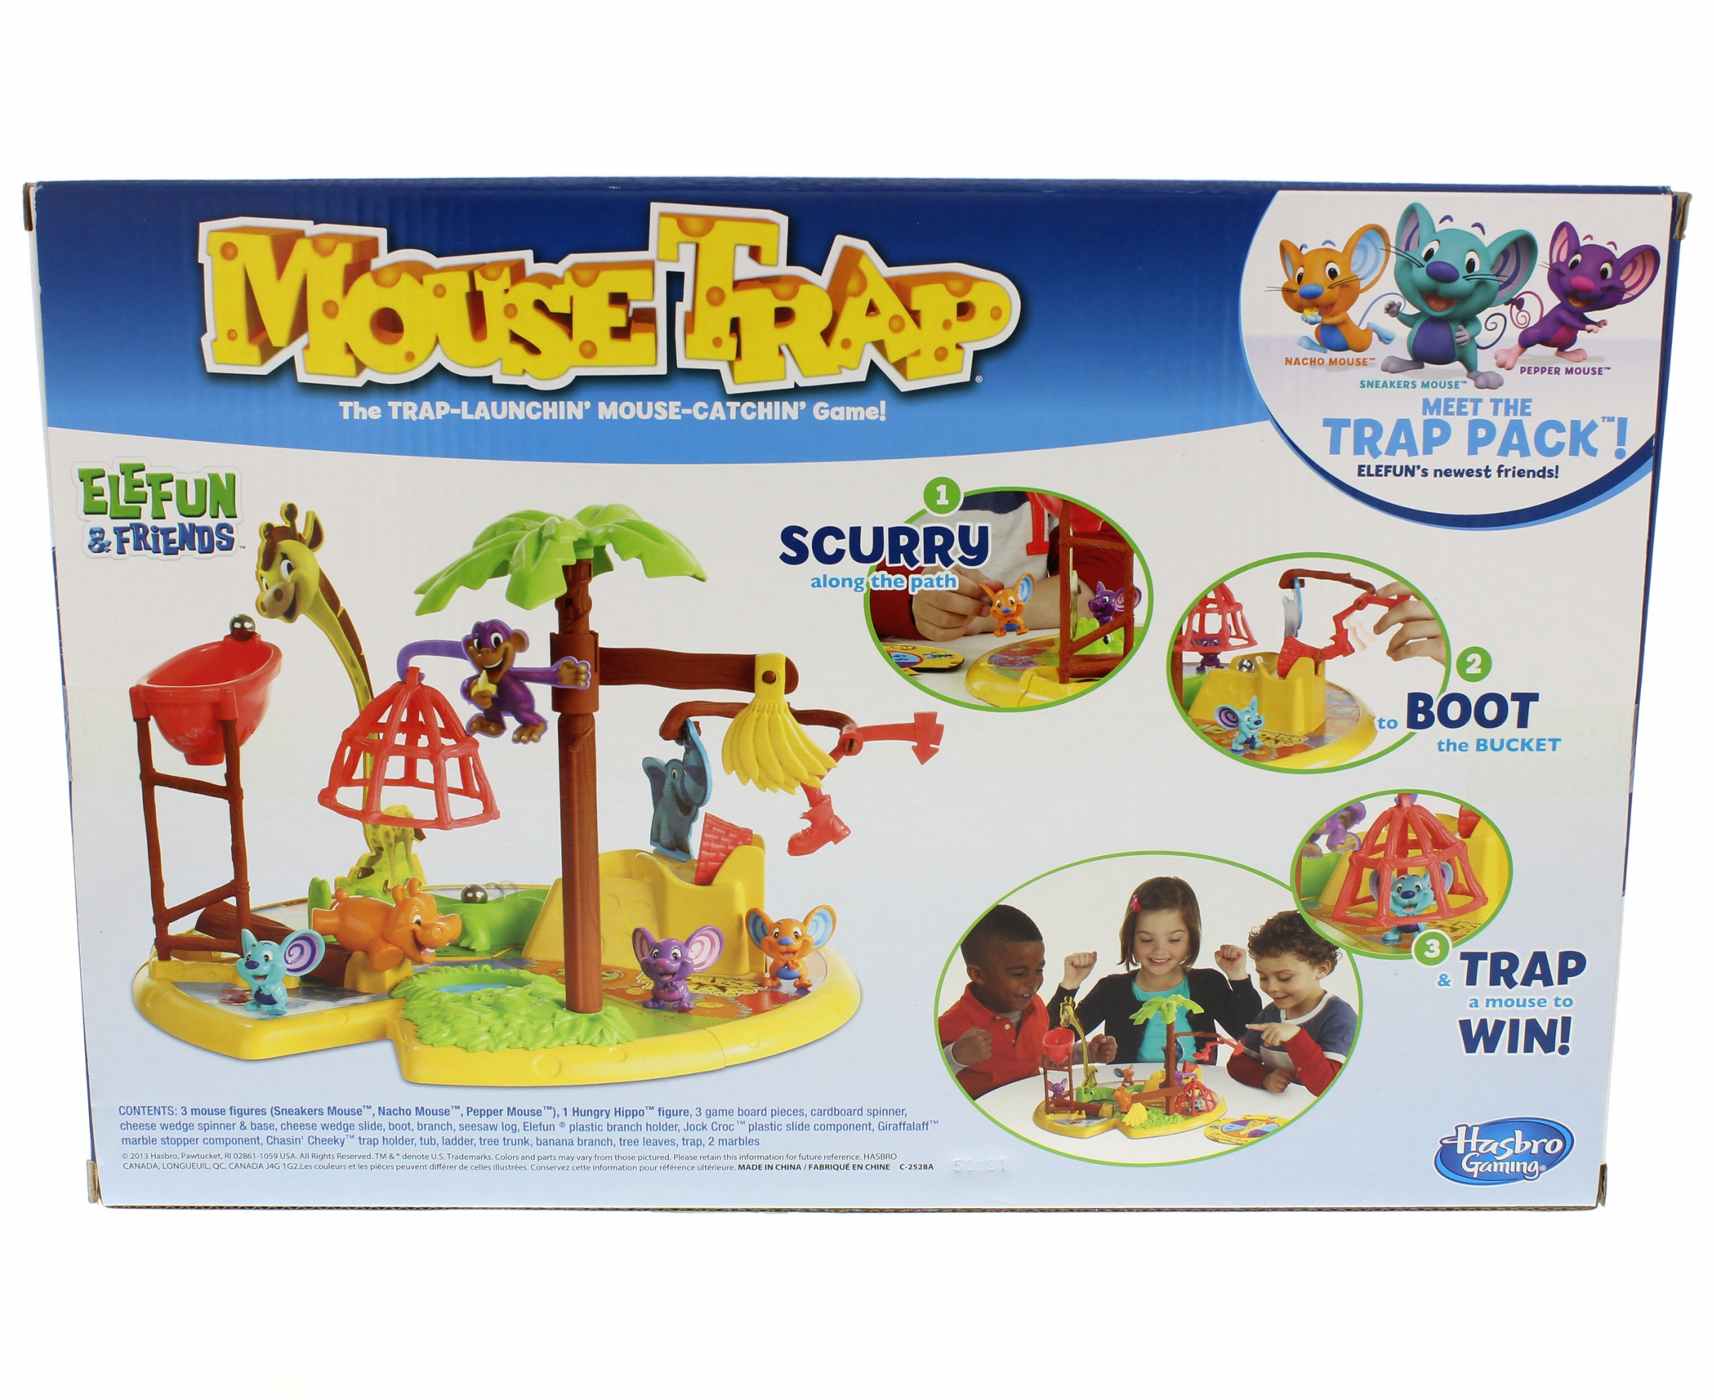 Hasbro Classic Mouse Trap Game - Shop Games at H-E-B